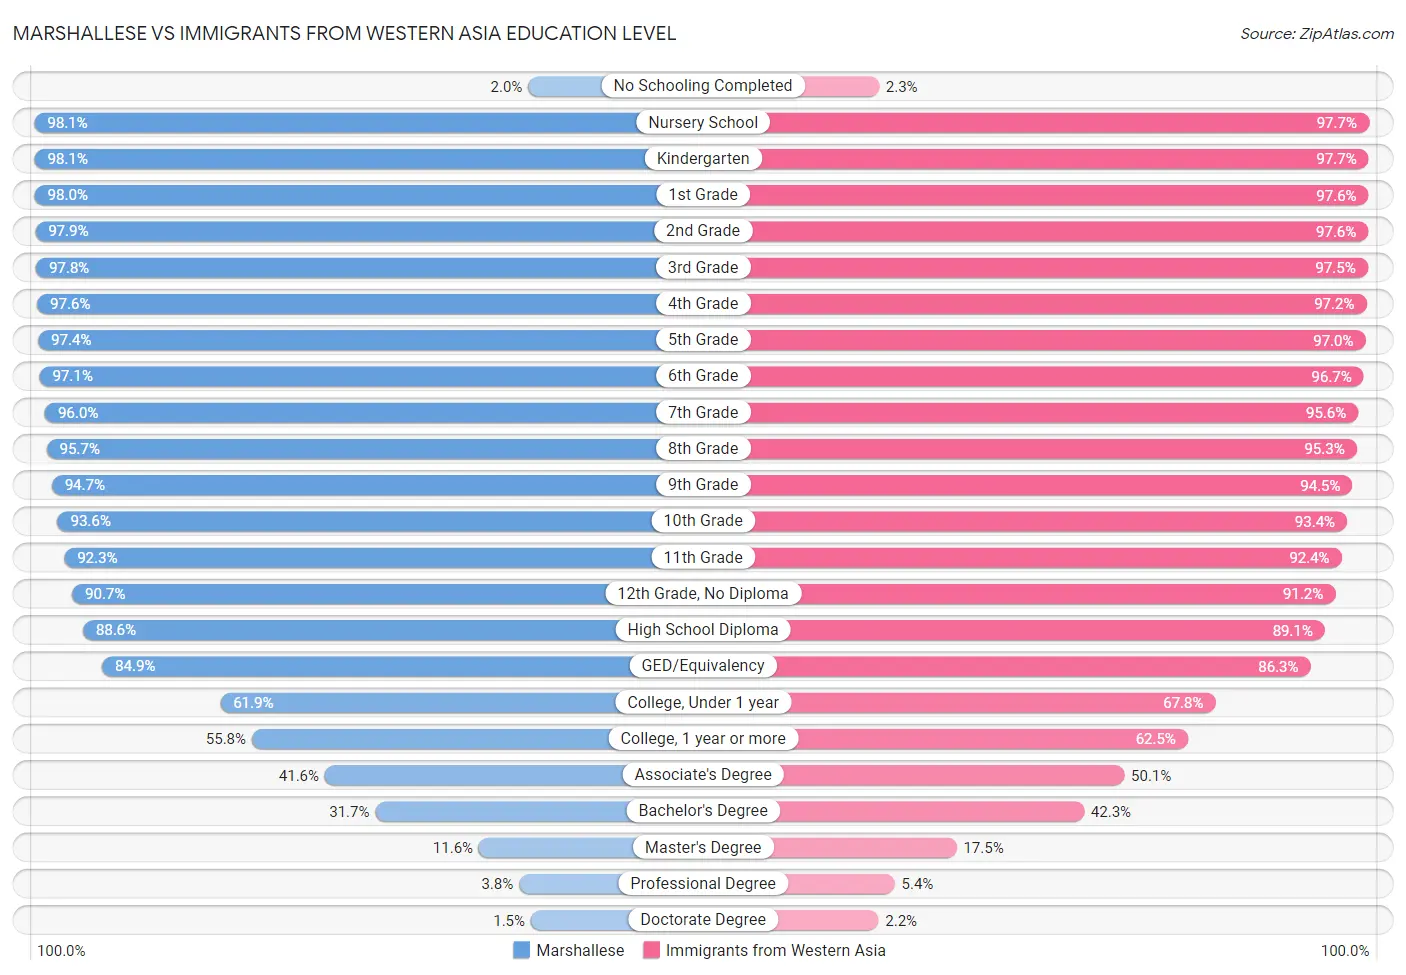 Marshallese vs Immigrants from Western Asia Education Level